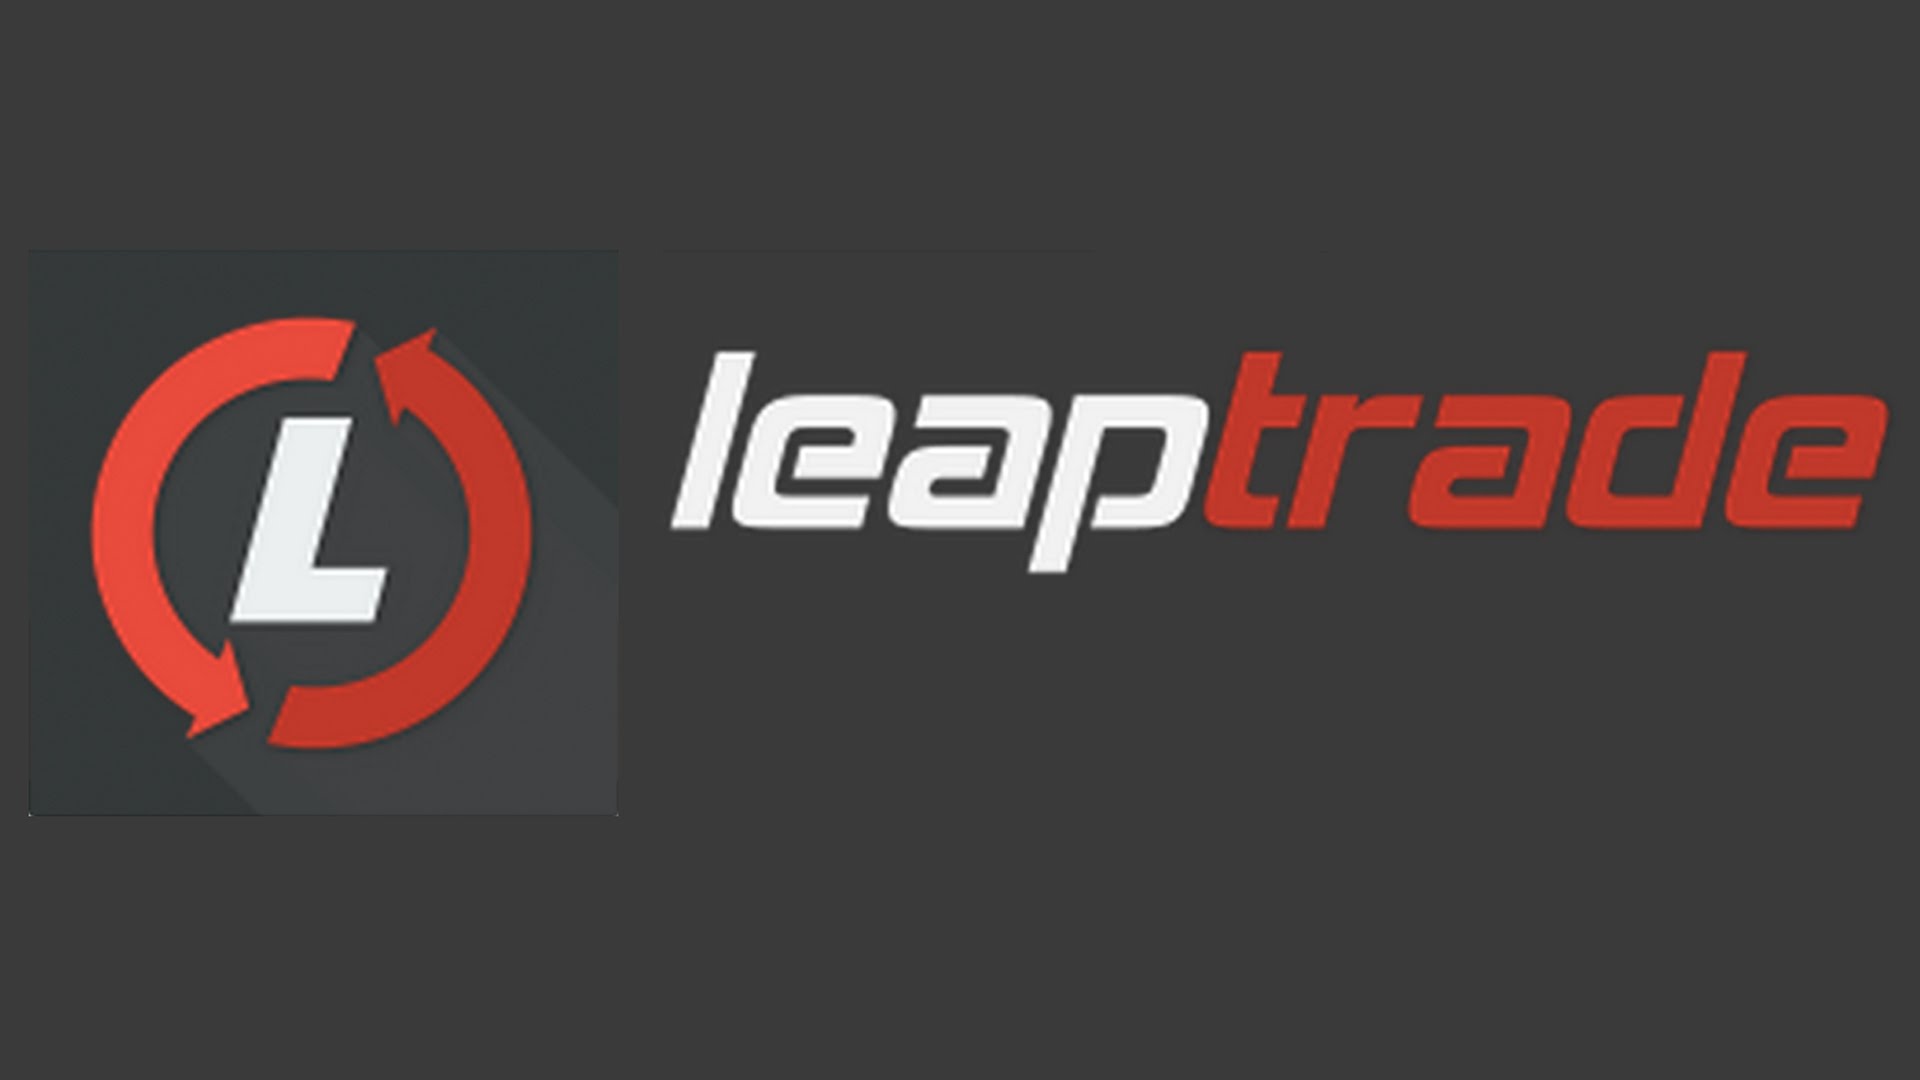 Leaptrade (Buying and Selling Used Video Games)